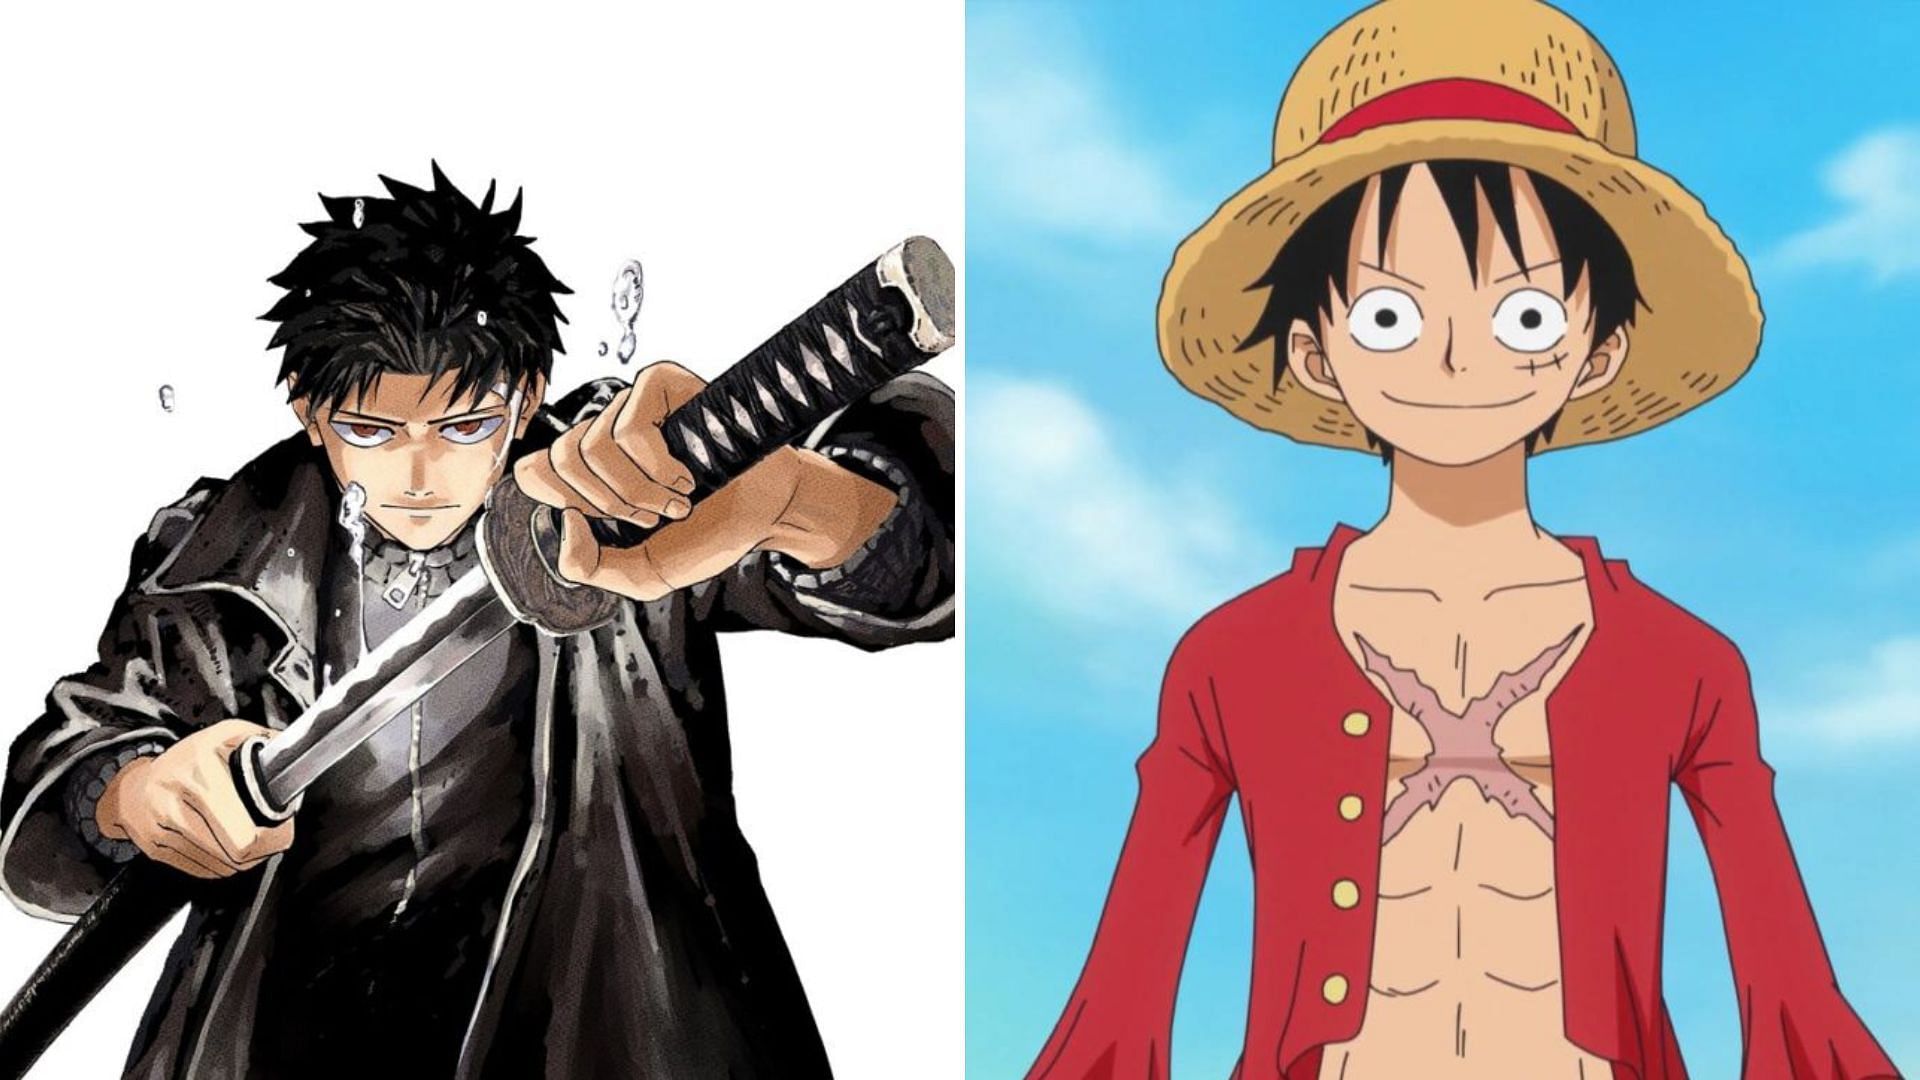 Best Selling Manga of All Time: One Piece, Naruto & More